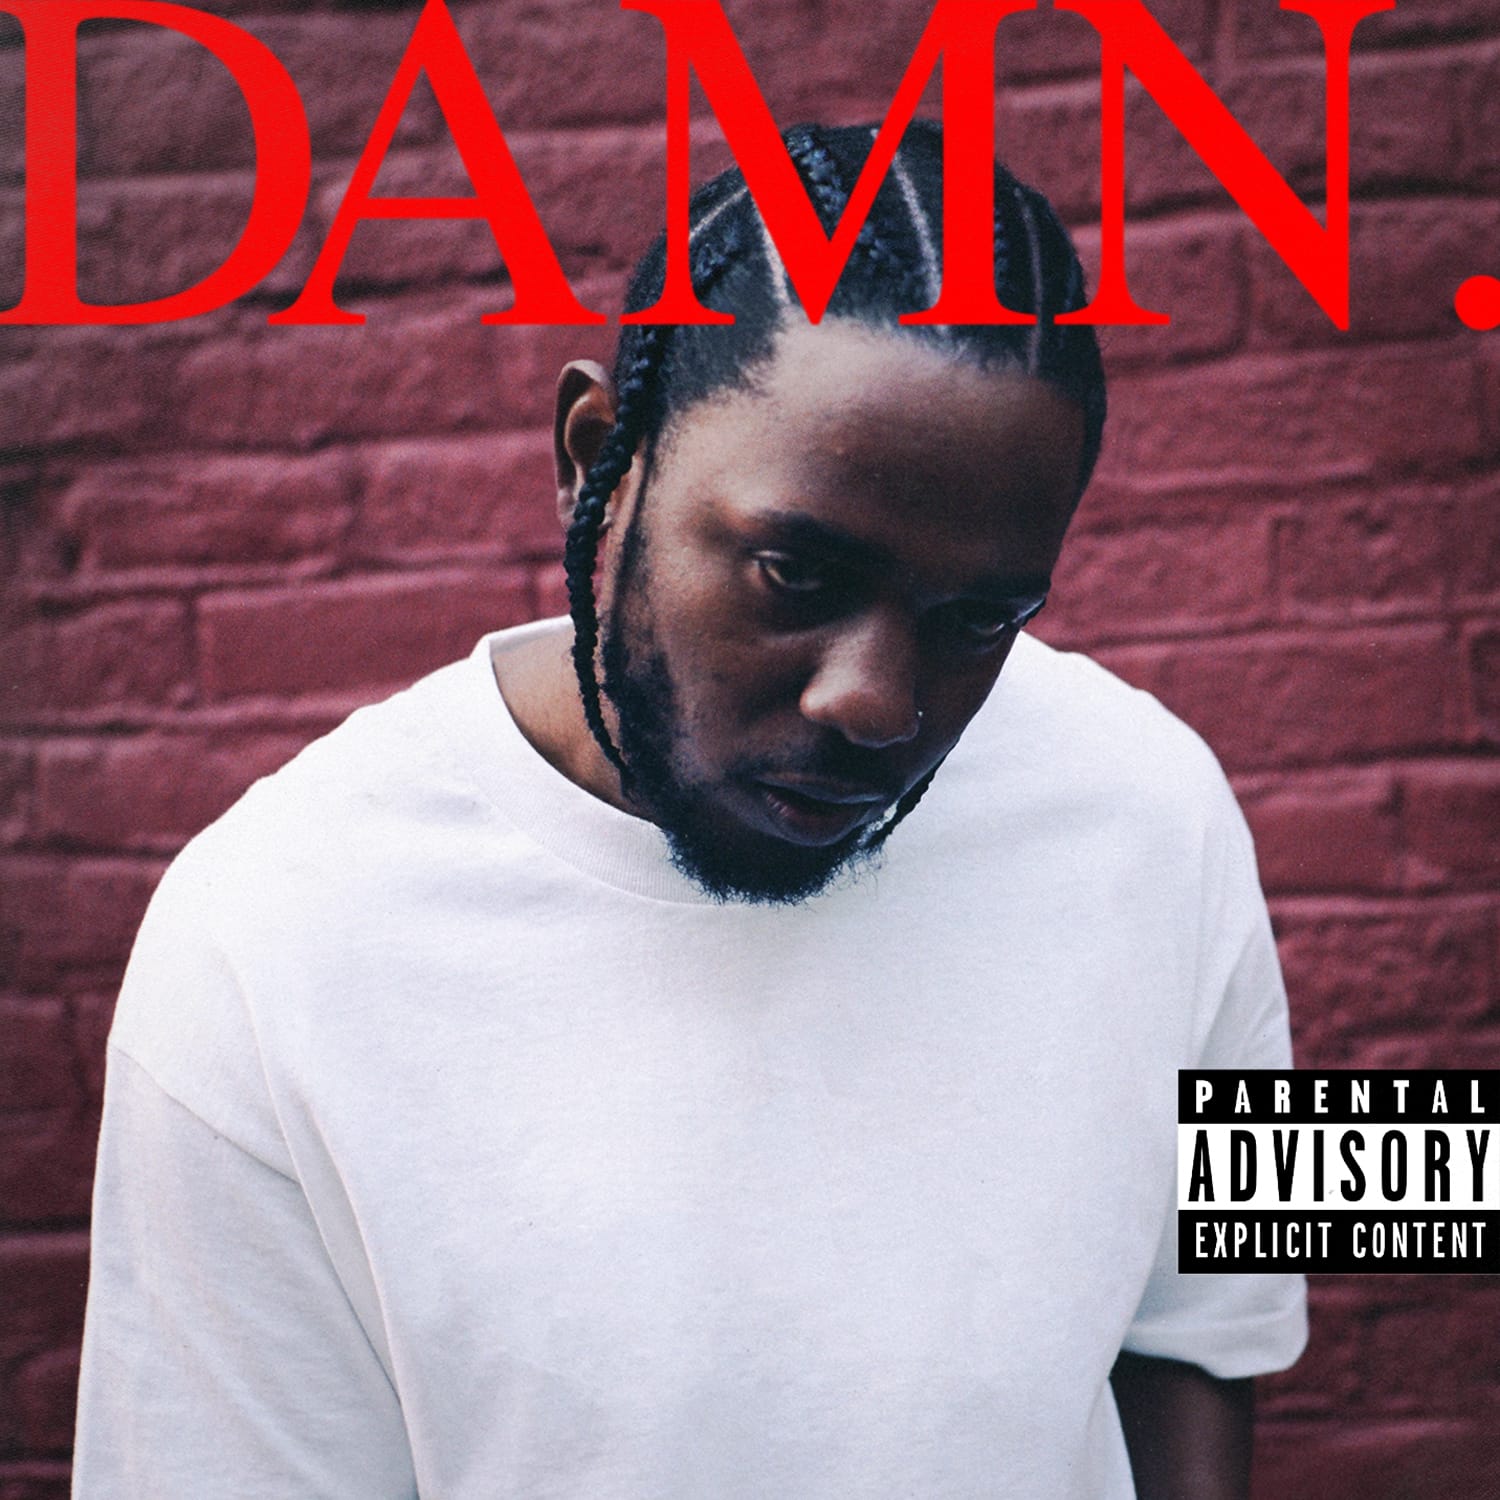 This cover image released by Interscope Records shows "Damn." by Kendrick Lamar. On Monday, April 16, 2018, Lamar won the Pulitzer Prize for music for his album.